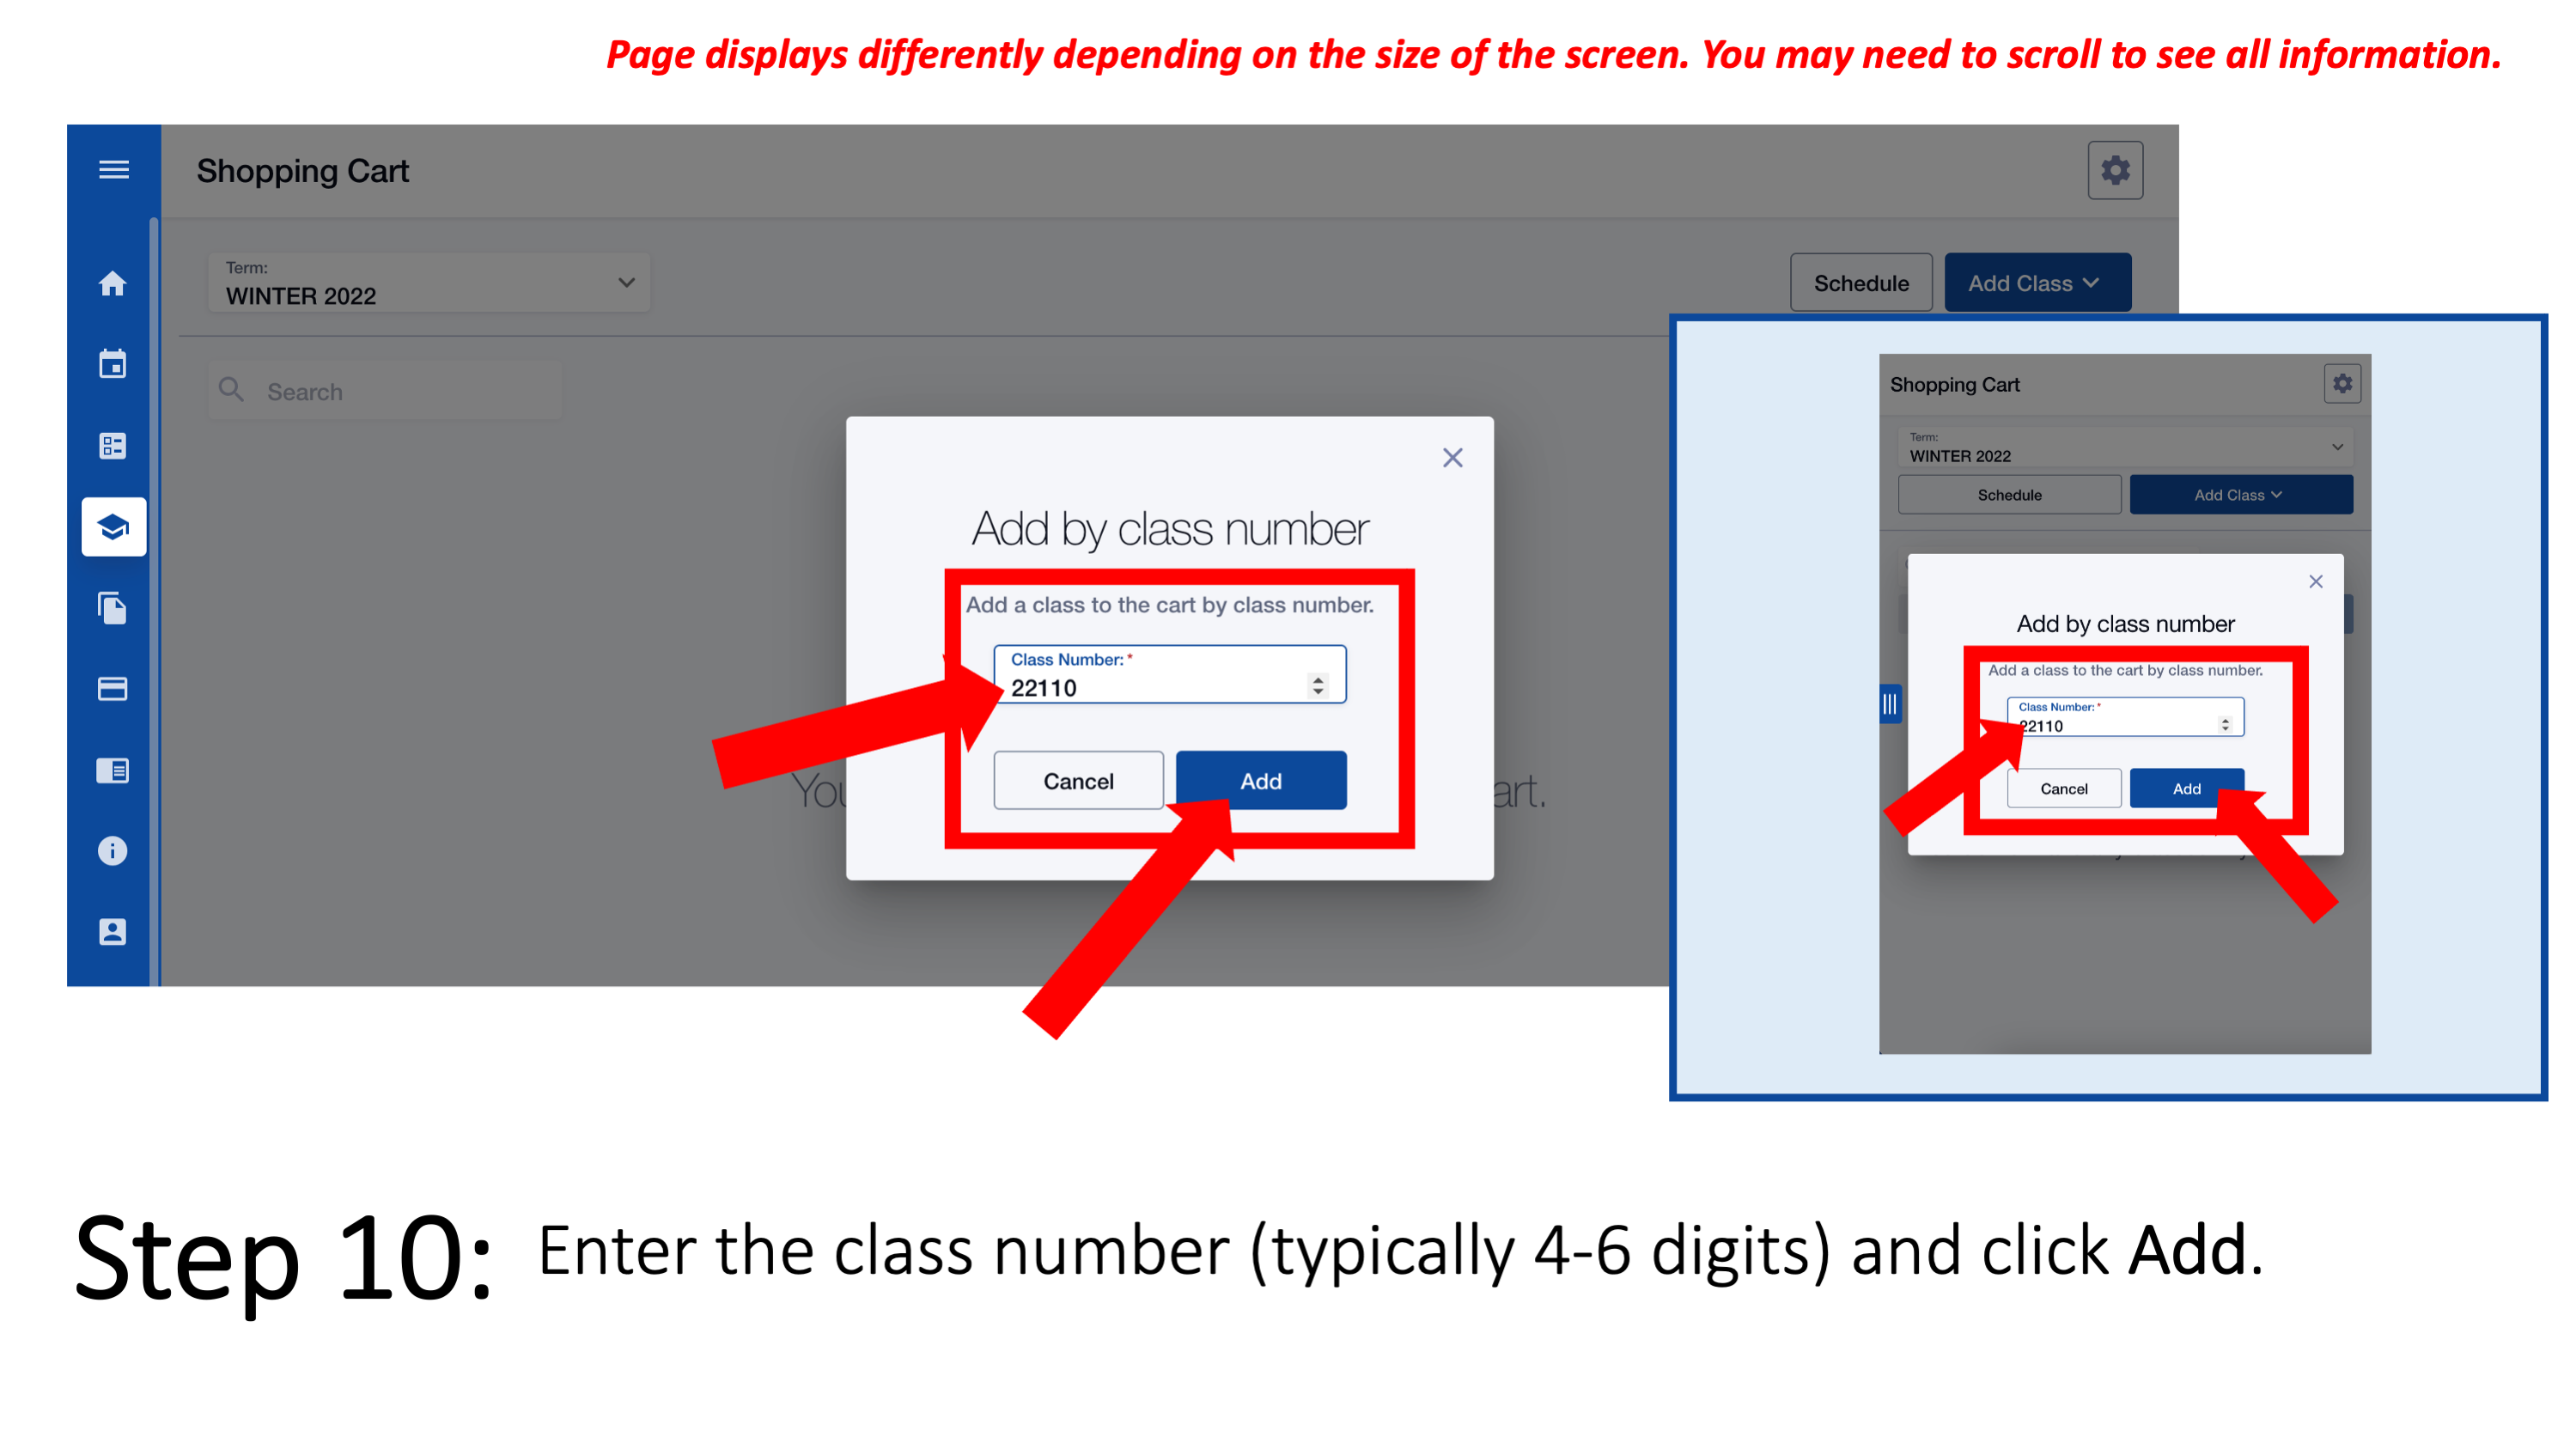 Step 10: Enter the class number (typically 4-6 digits) and click Add.